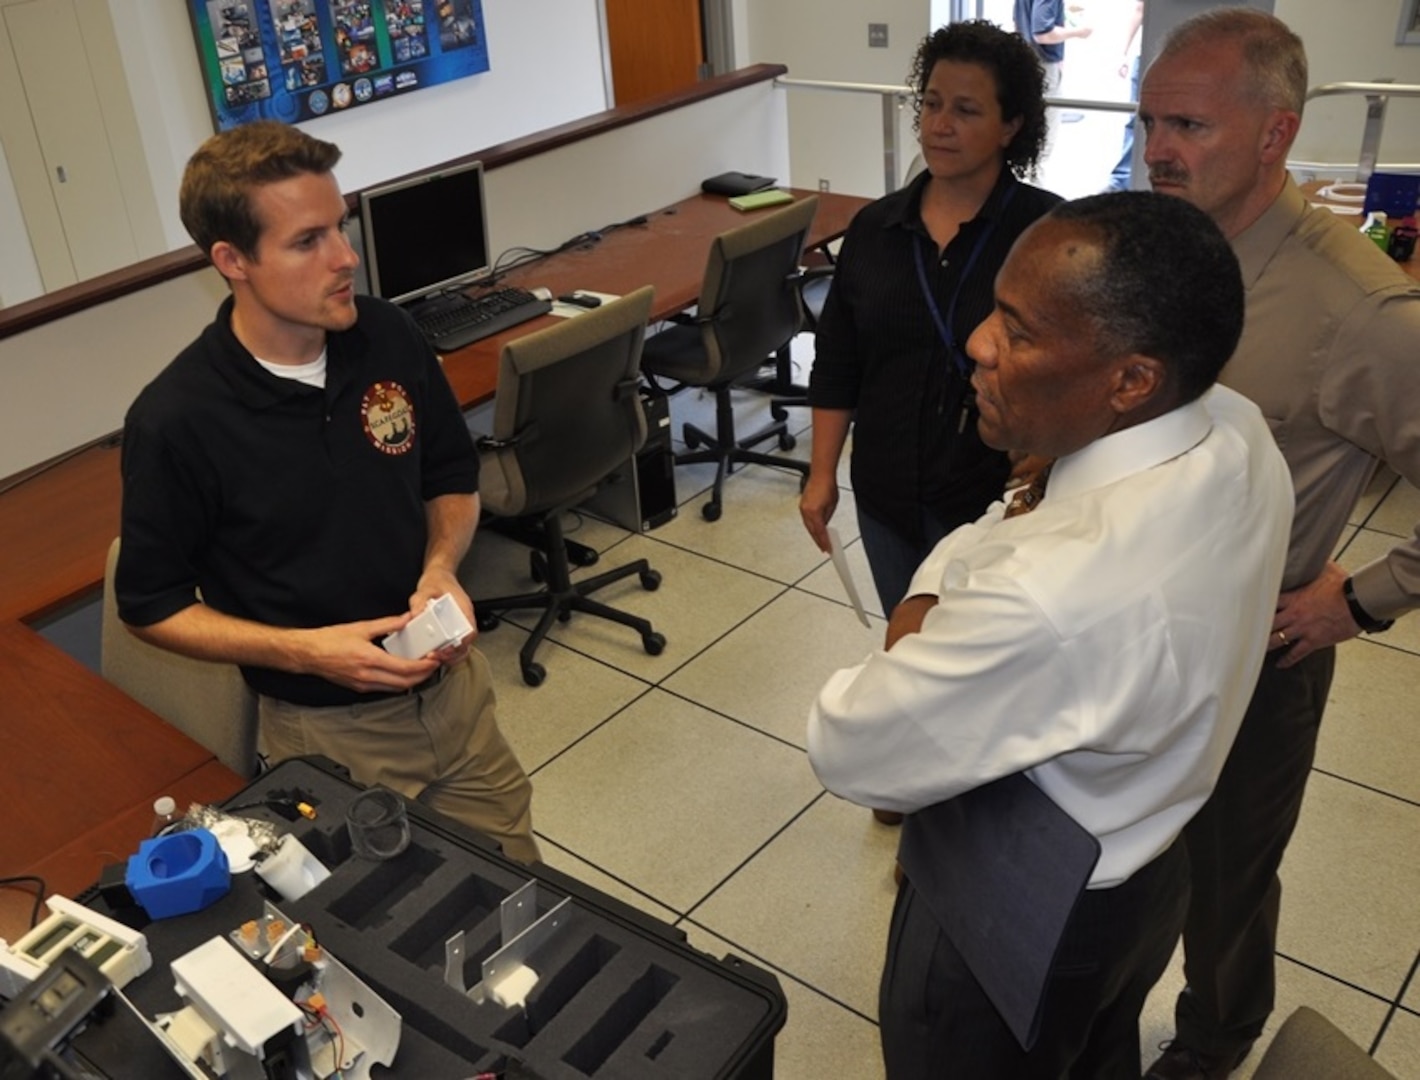 DAHLGREN, Va. (June 15, 2017) - Navy engineer Jonathan Crook briefs visitors about SCAPEGOAT chemical, biological, and radiological (CBR) detection system components during a demonstration. SCAPEGOAT was designed, prototyped, and tested over a six-month period by a team of junior scientists and engineers engaged in the Sly Fox Program at Naval Surface Warfare Center Dahlgren Division. With its relatively low cost and modular interfaces, the SCAPEGOAT system demonstrates the use of emerging technology in meeting warfighter needs.